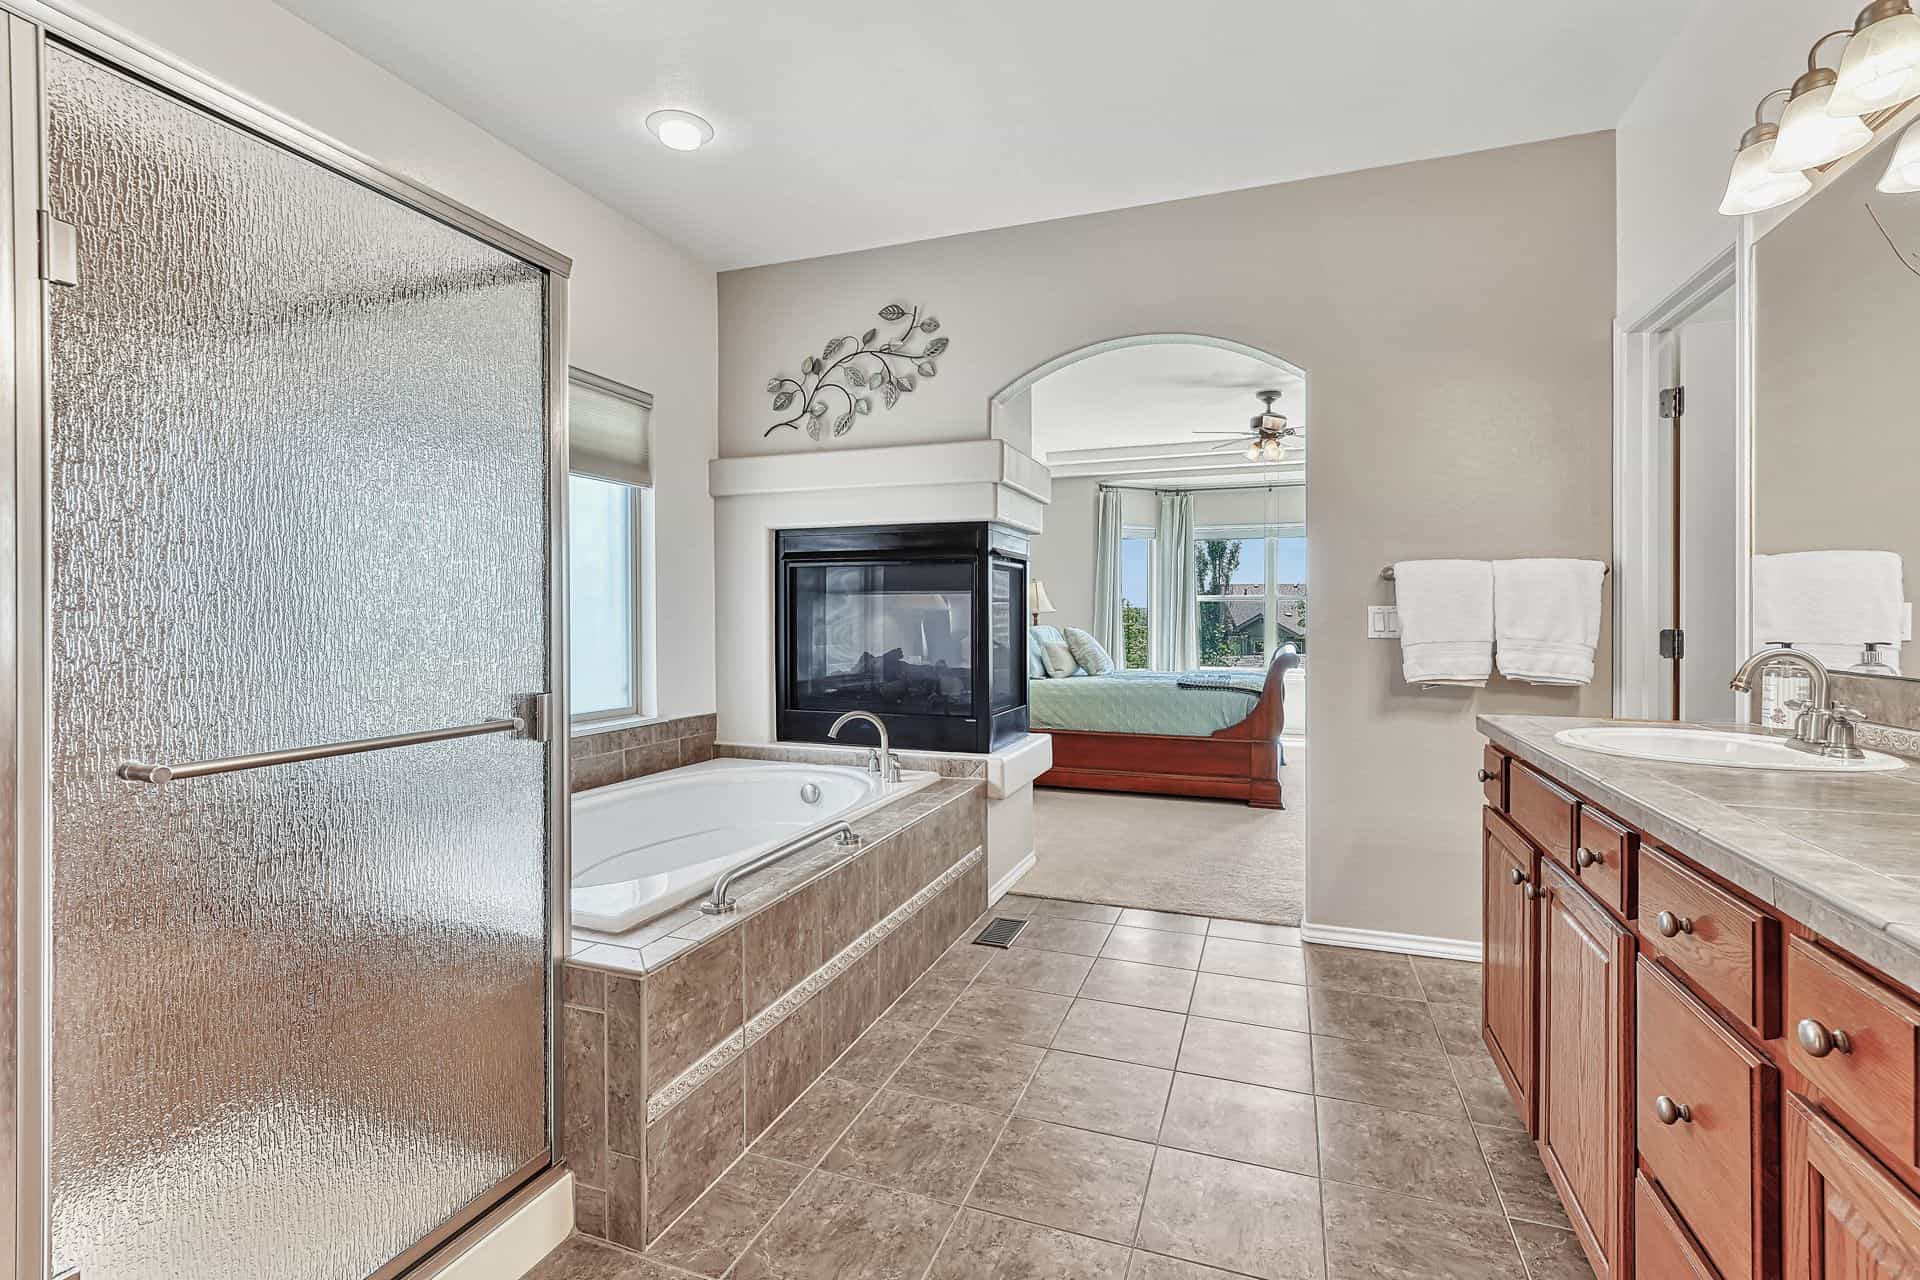 Primary Master Bathroom with Pedestal Fireplace